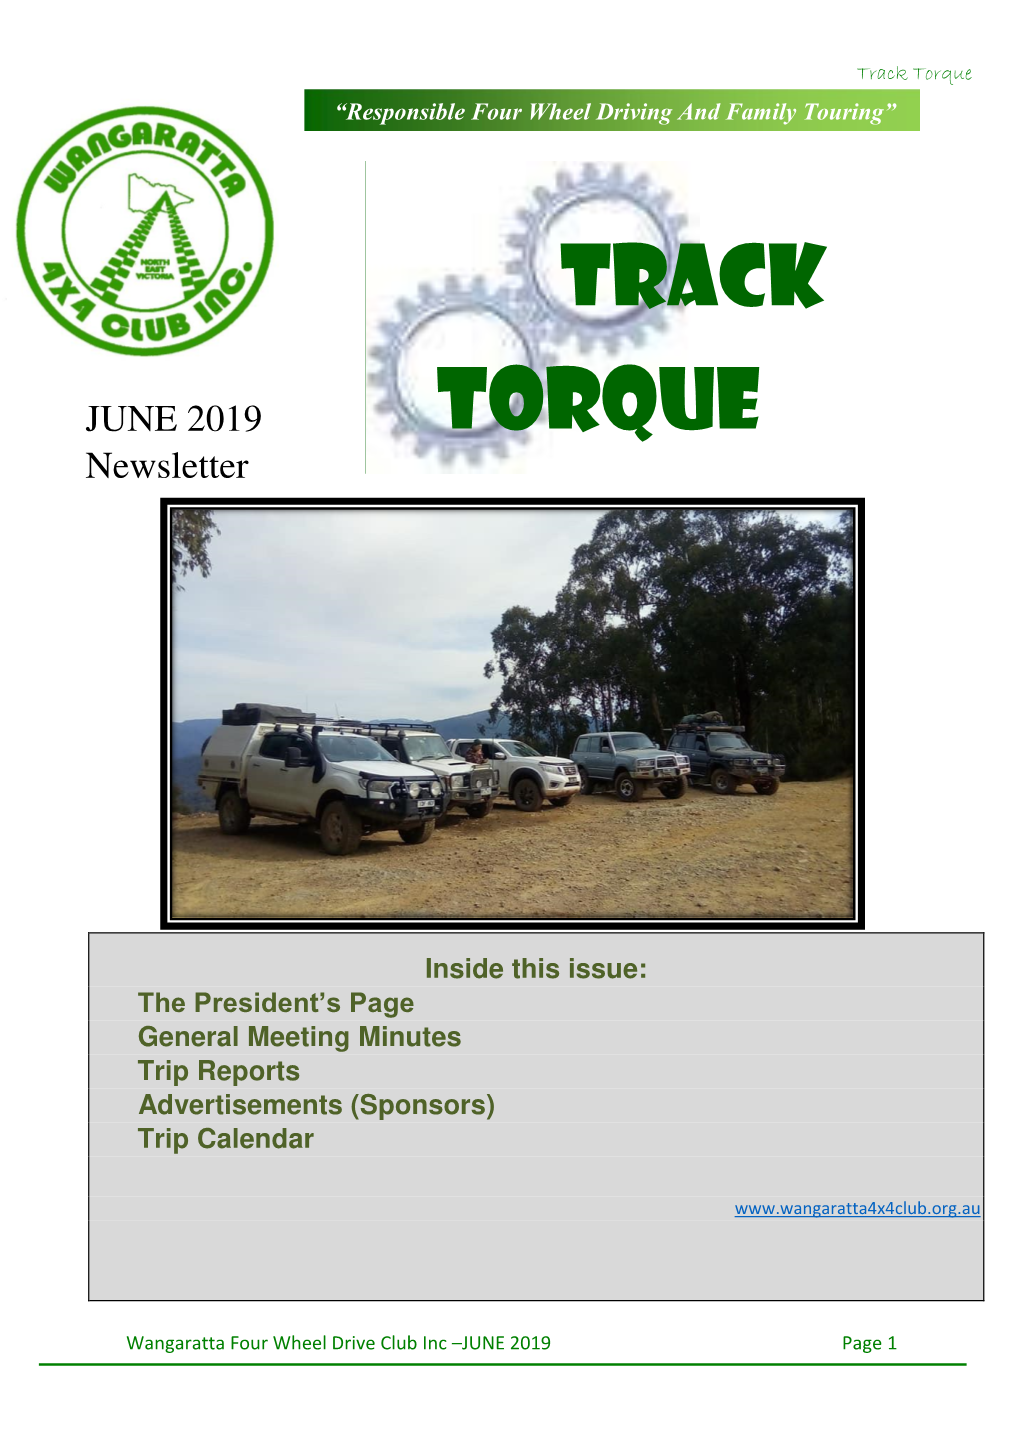 Track Torque “Responsible Four Wheel Driving and Family Touring”